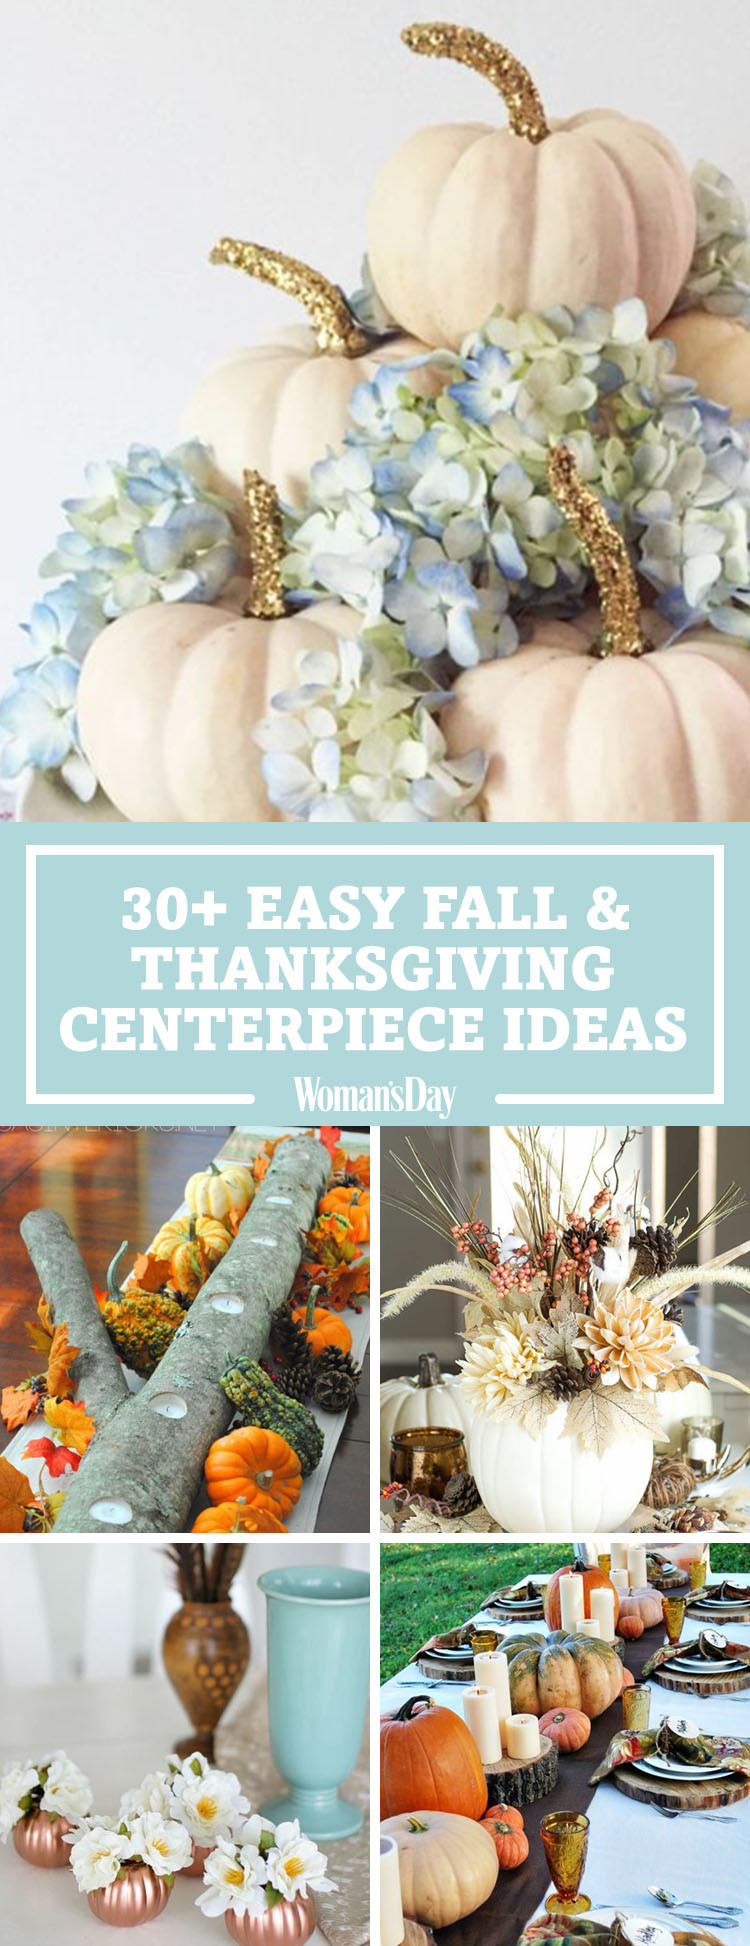 Simple Thanksgiving Table Decorations
 40 Fall and Thanksgiving Centerpieces DIY Ideas for Fall